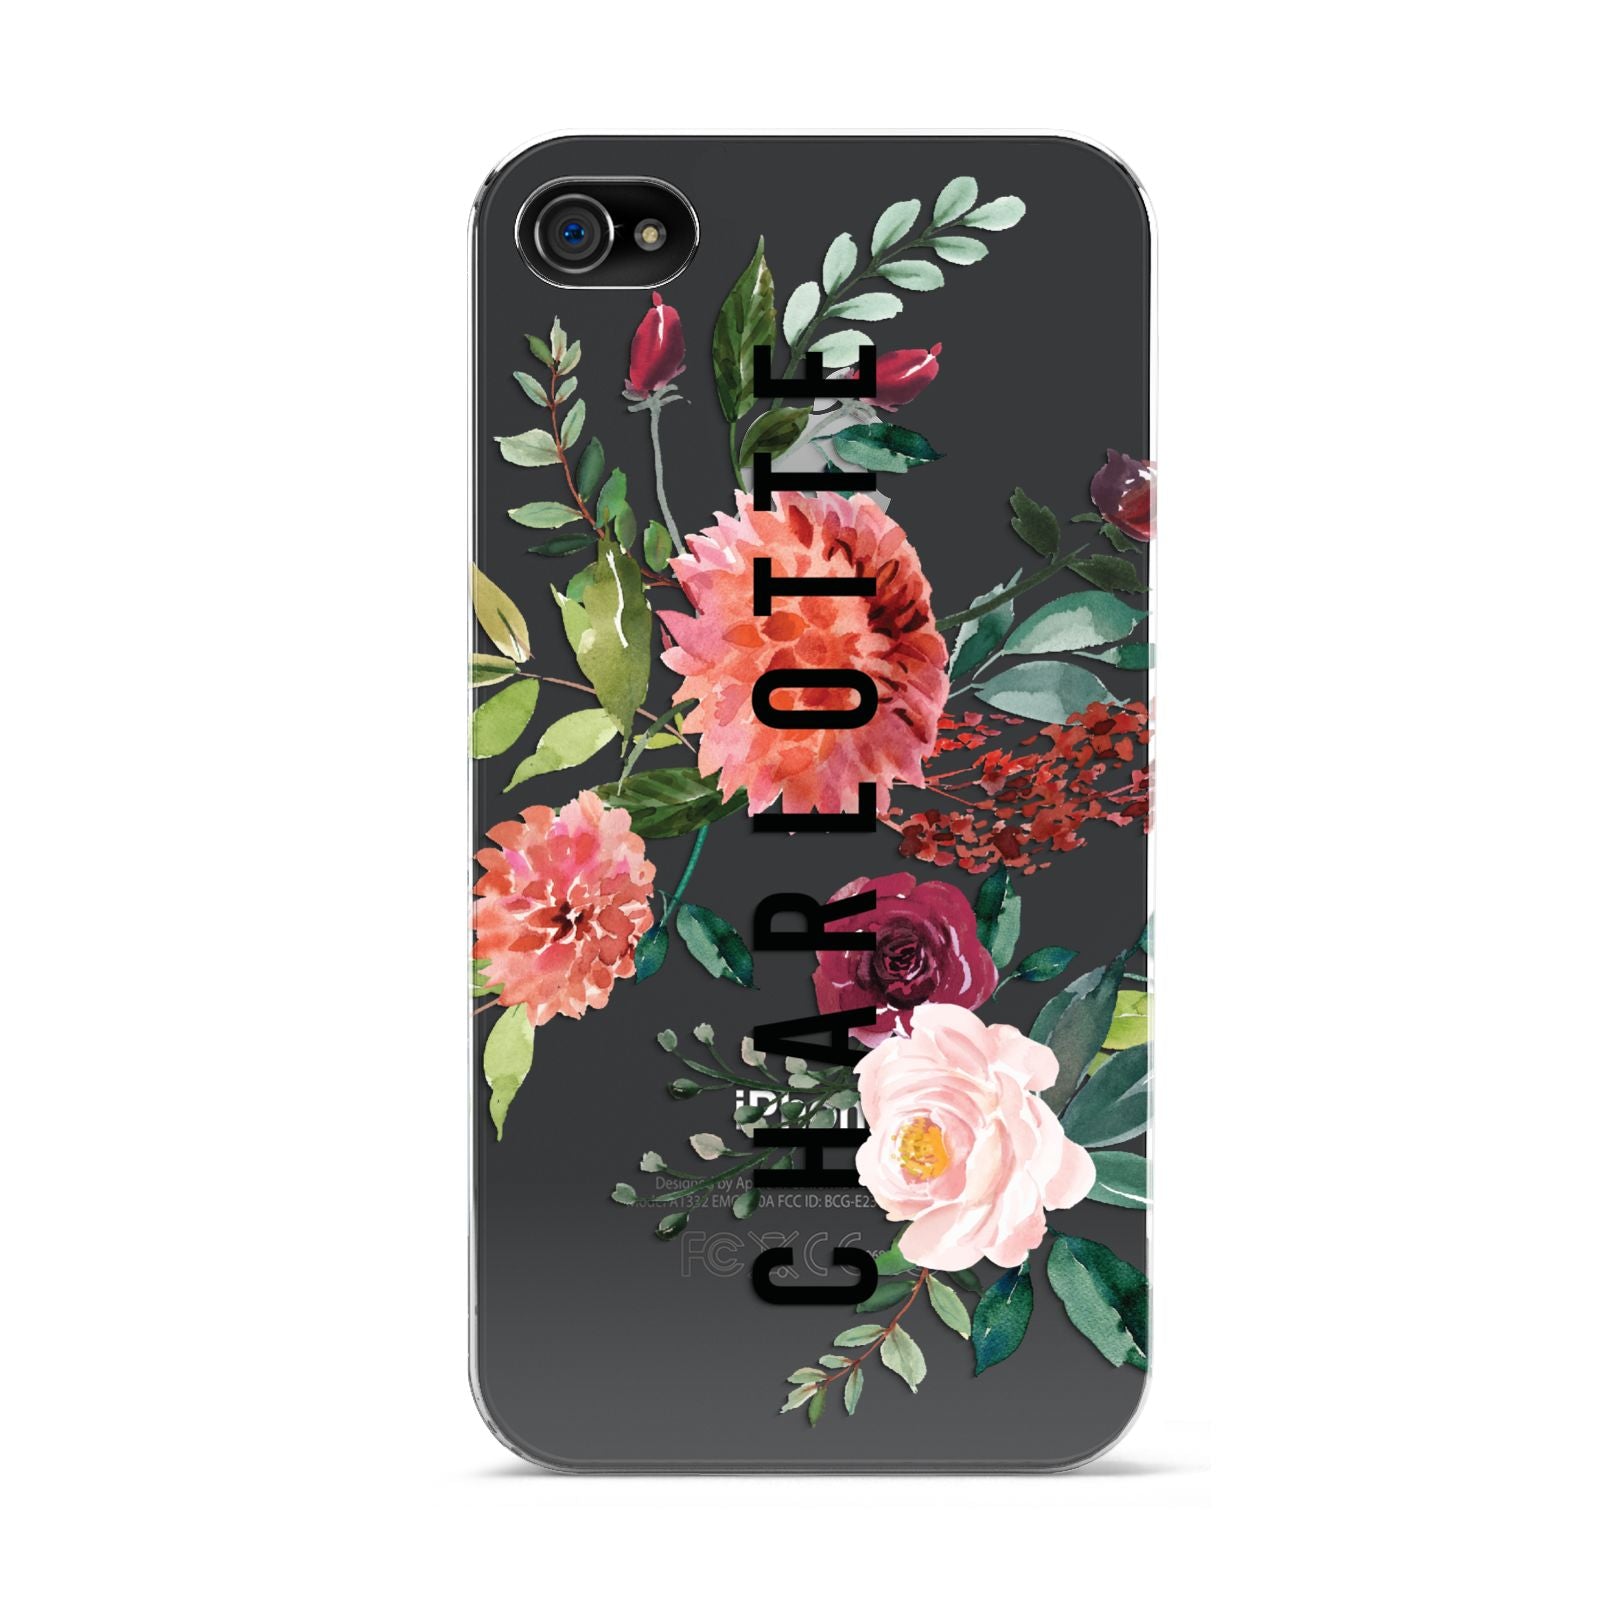 Personalised Side Name Clear Floral Apple iPhone 4s Case